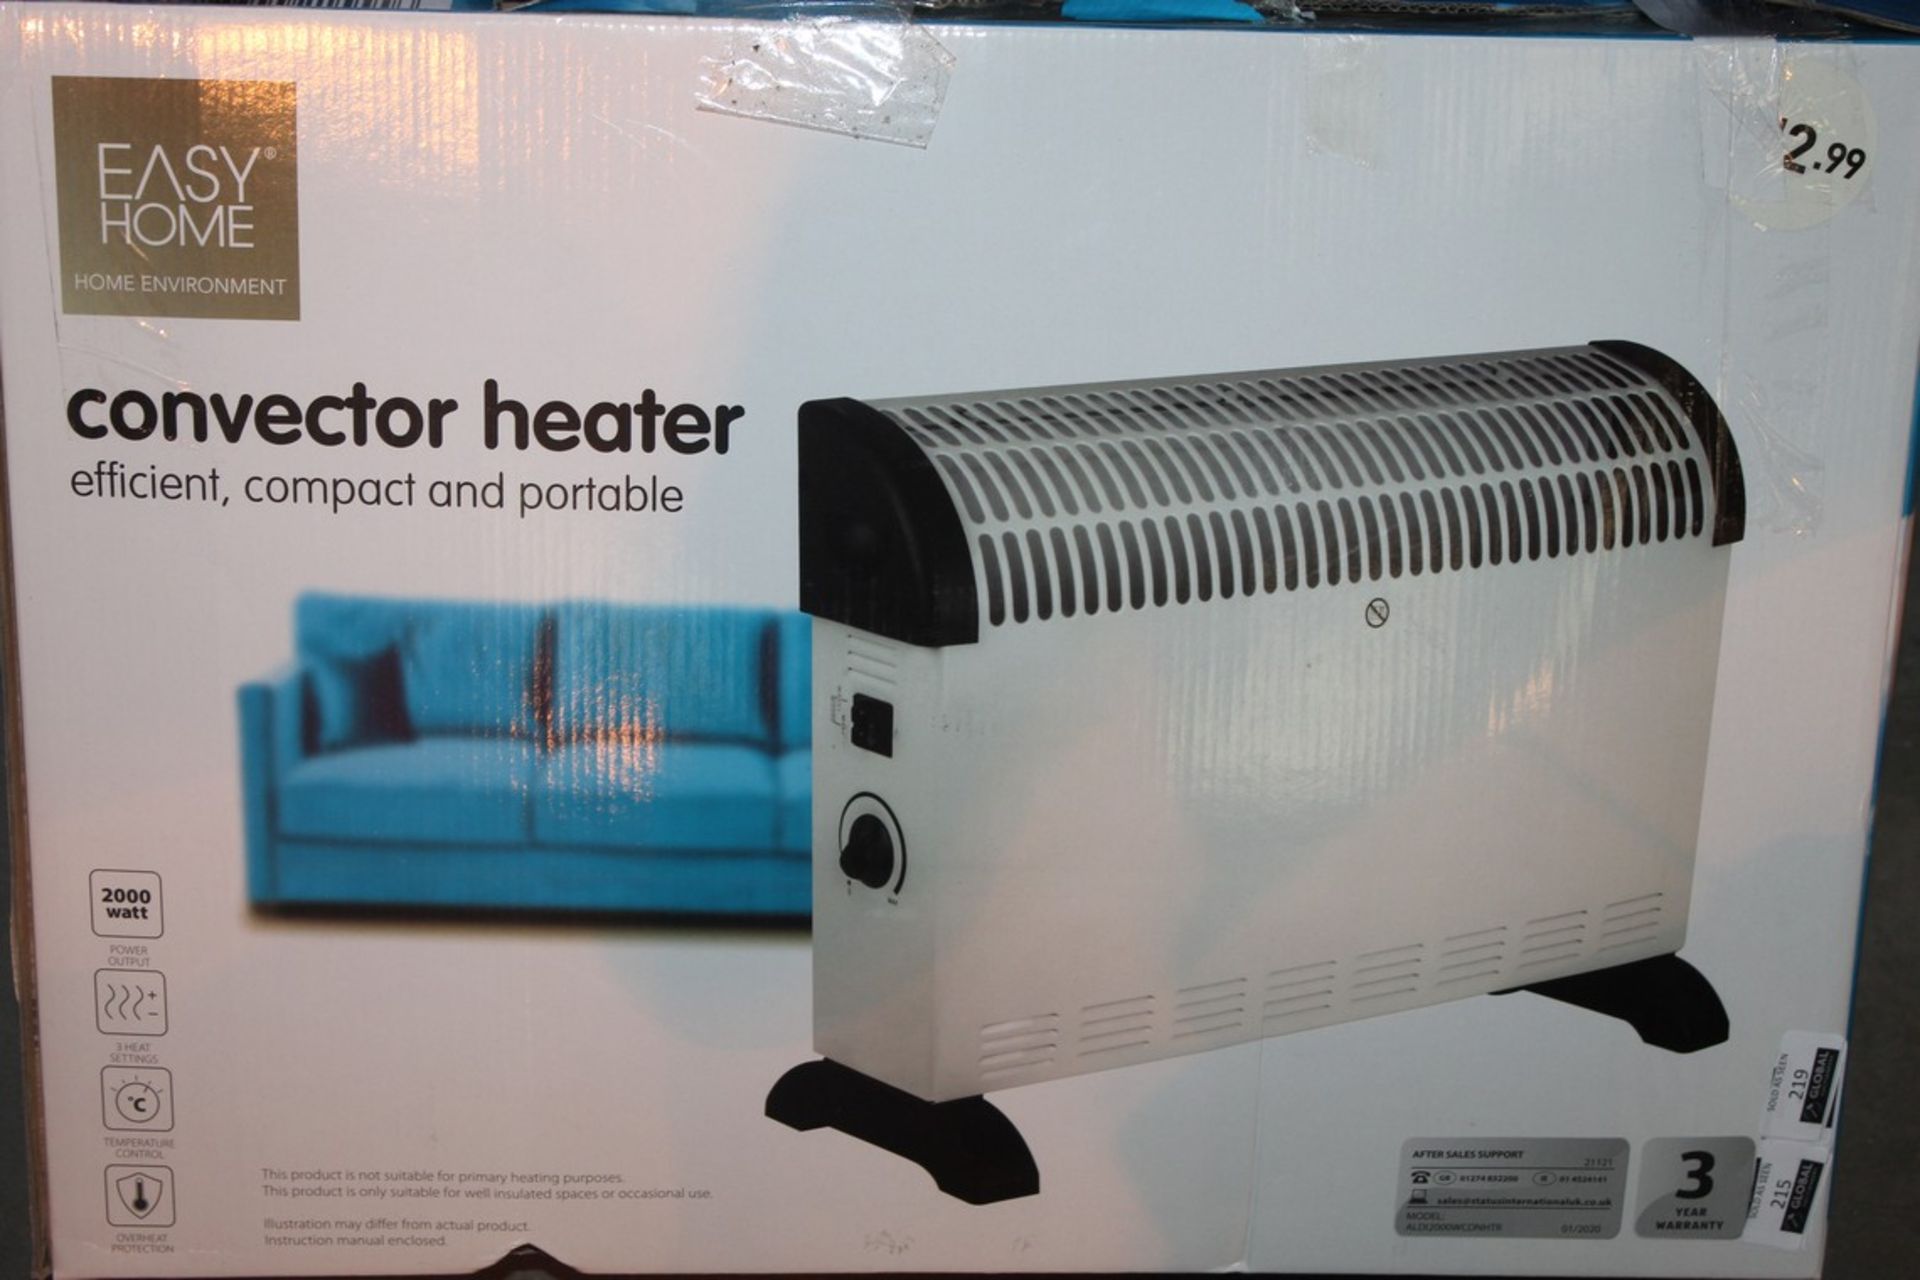 Lot To Contain 5 Easy Home Convector Heaters Combined RRP £75 (Pictures Are For Illustration